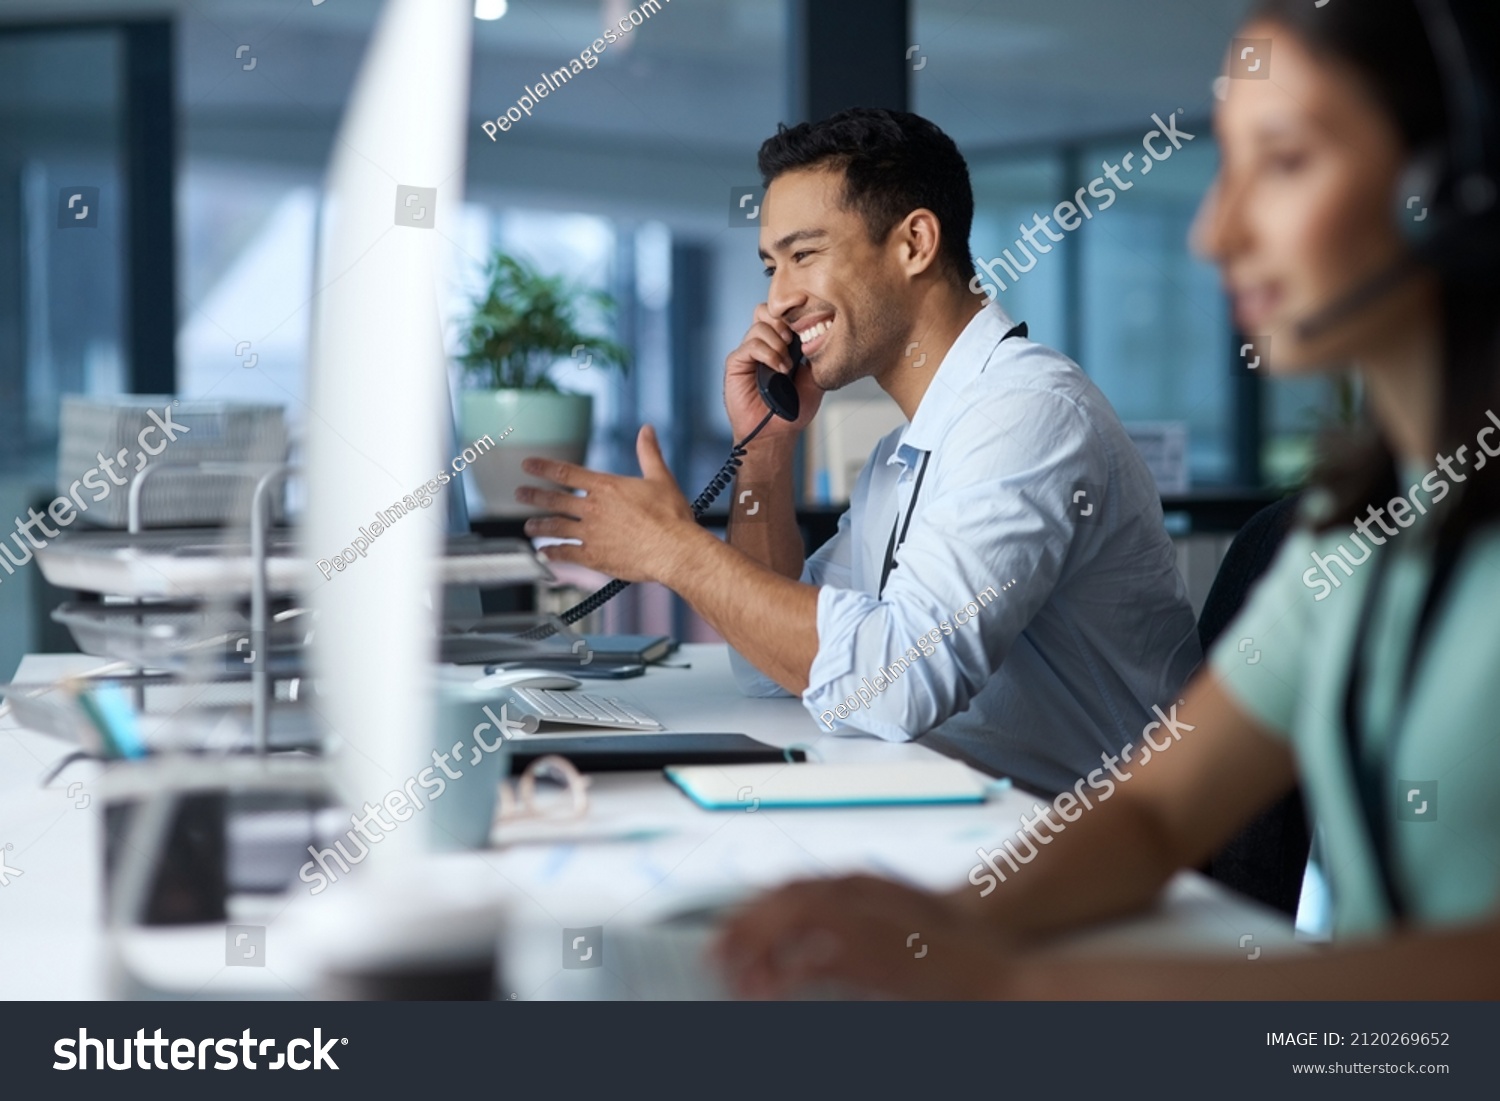 Good business is based on good communication. Shot of a young man answering the phone while working in a modern call centre. #2120269652